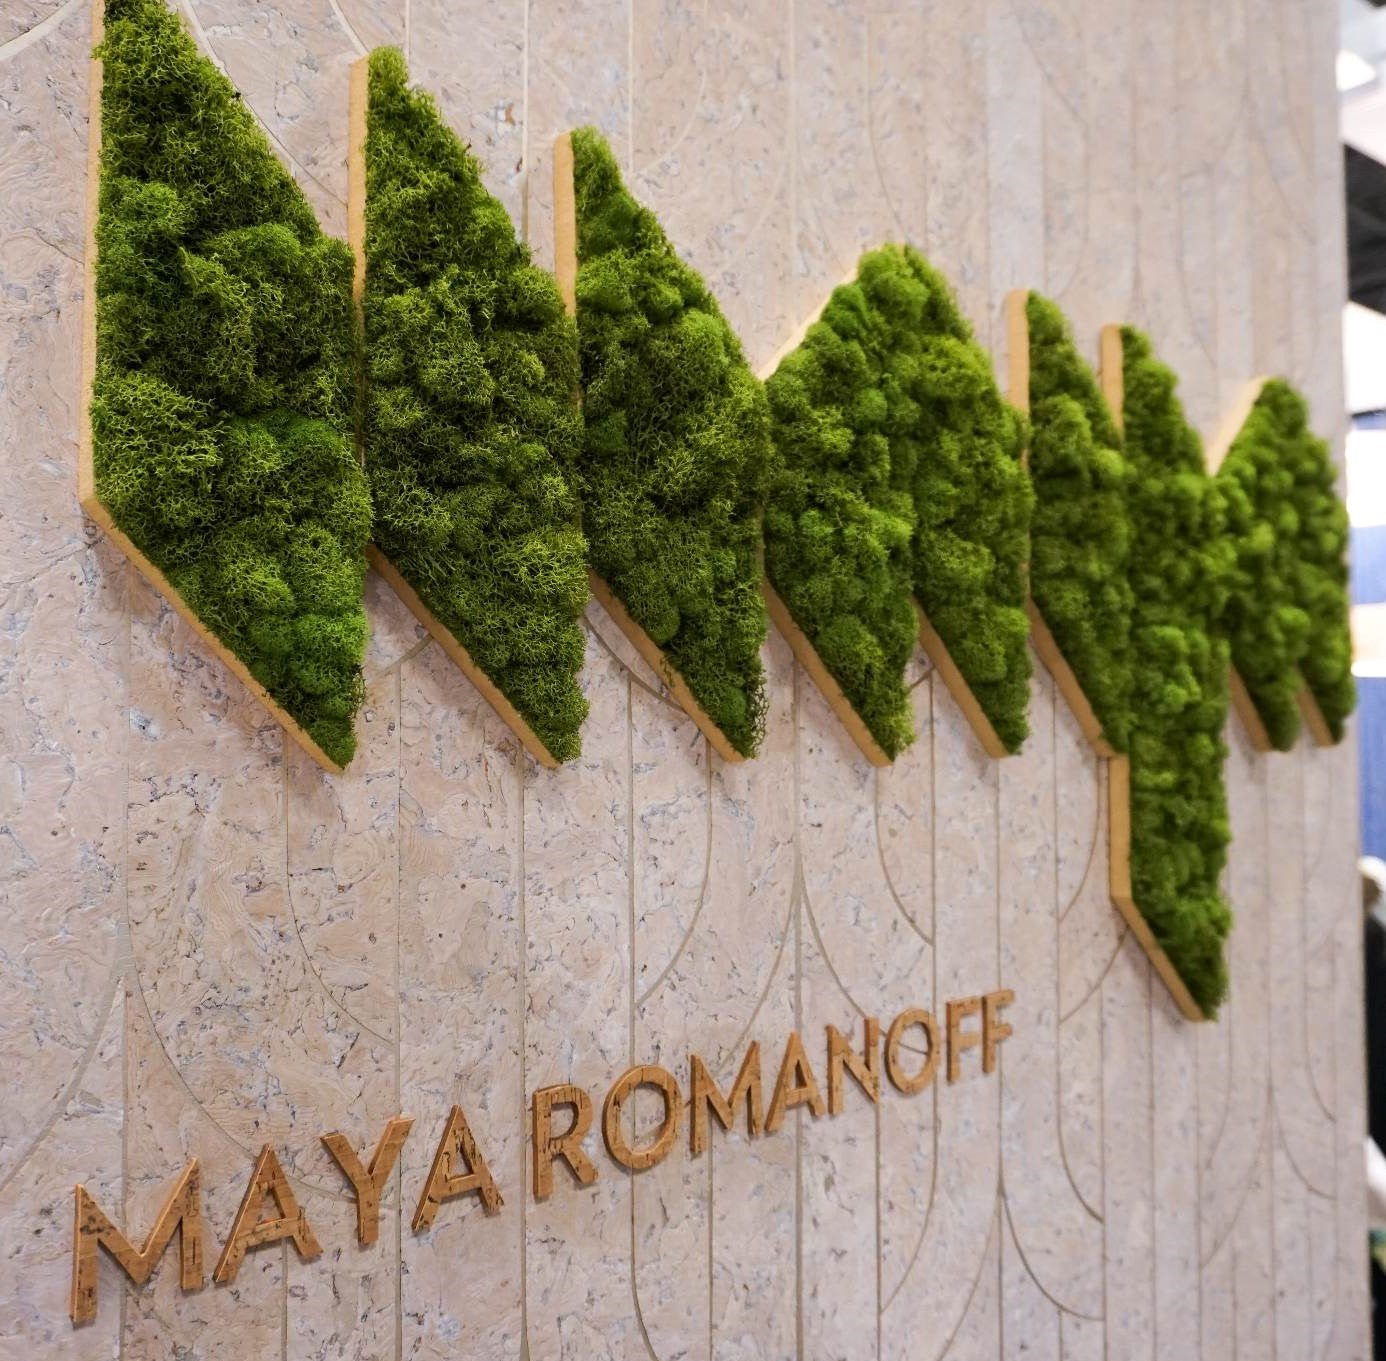 Custom Moss Logos, Signs and Lettering - Mossy Moss by Olia